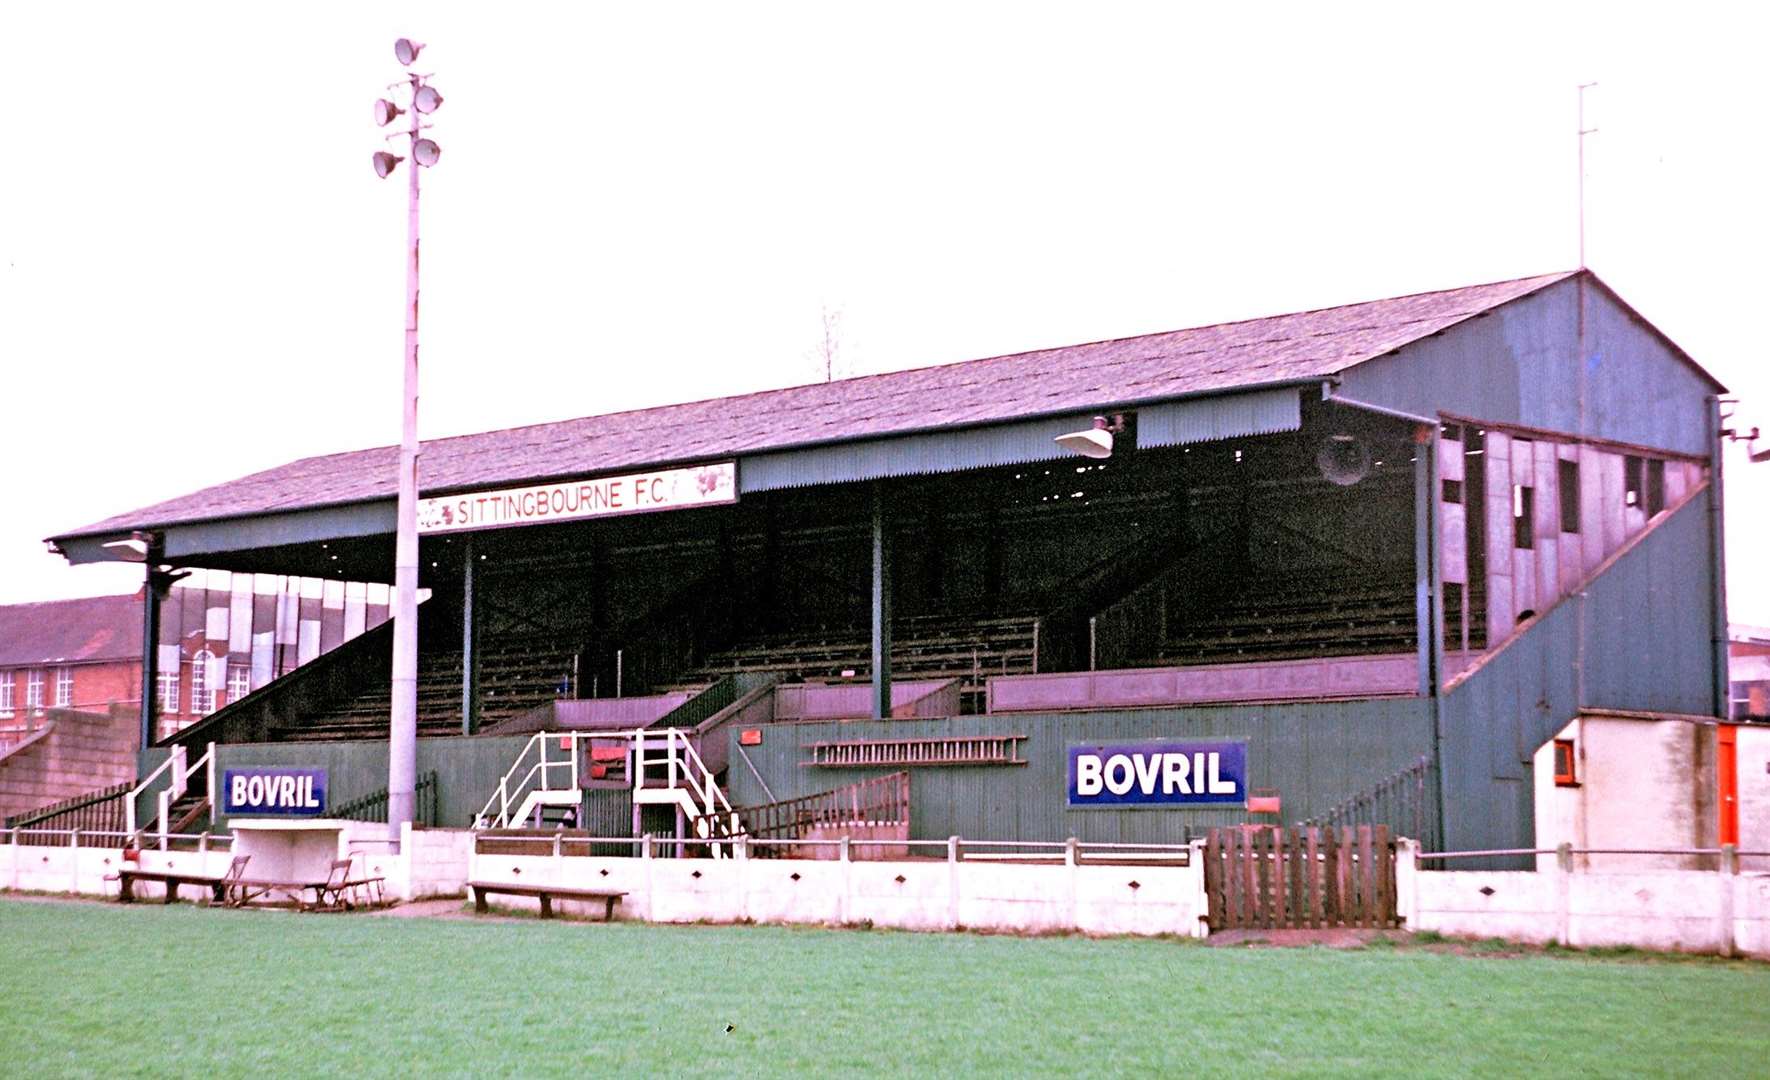 The Bull Ground - once home of Sittingbourne FC - pictured in 1975. Picture: Bob LIlliman